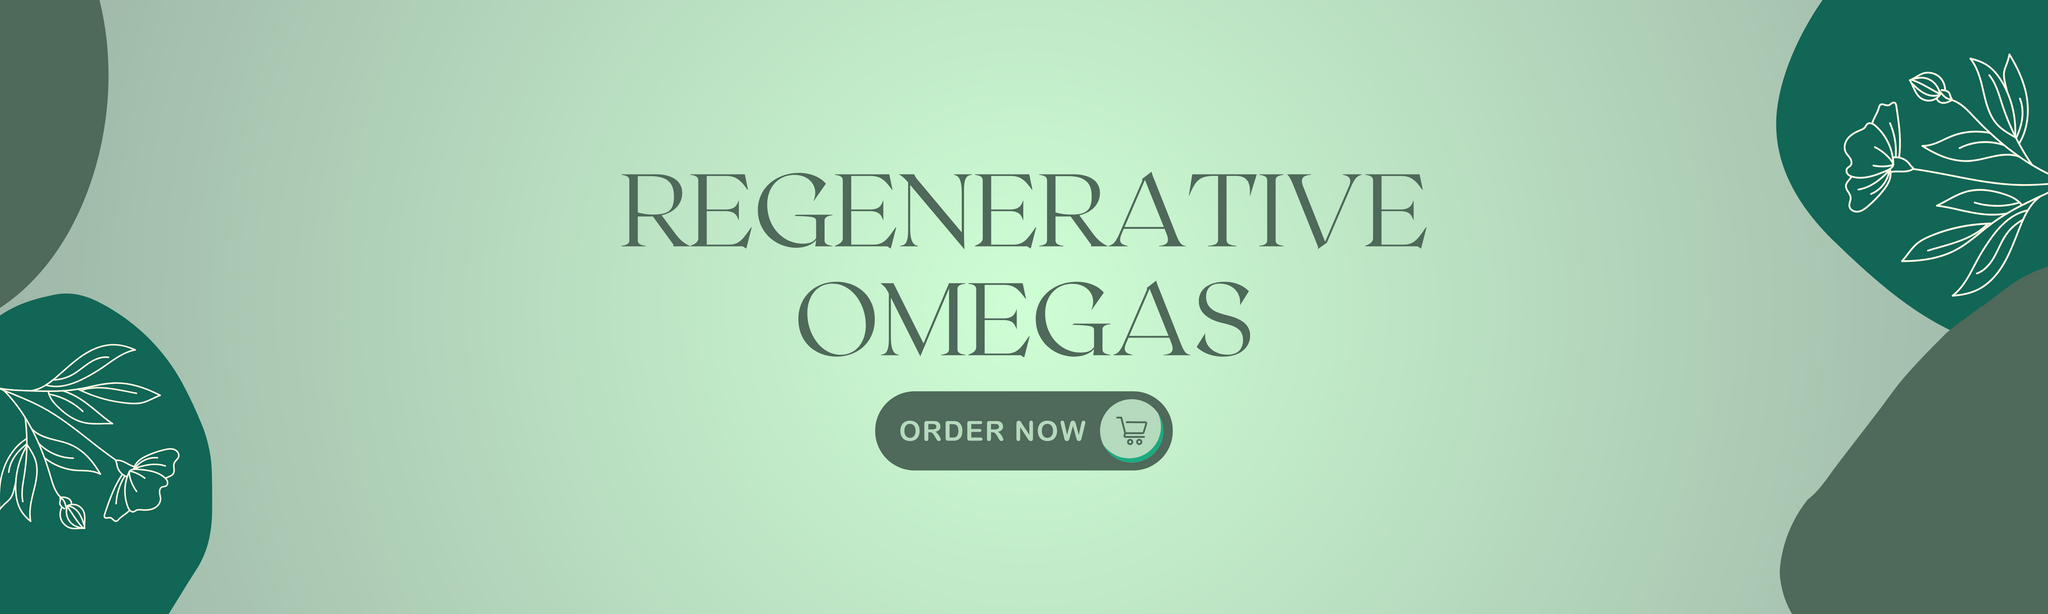 Regenerative Omegas Available Only at Sow & Arrow